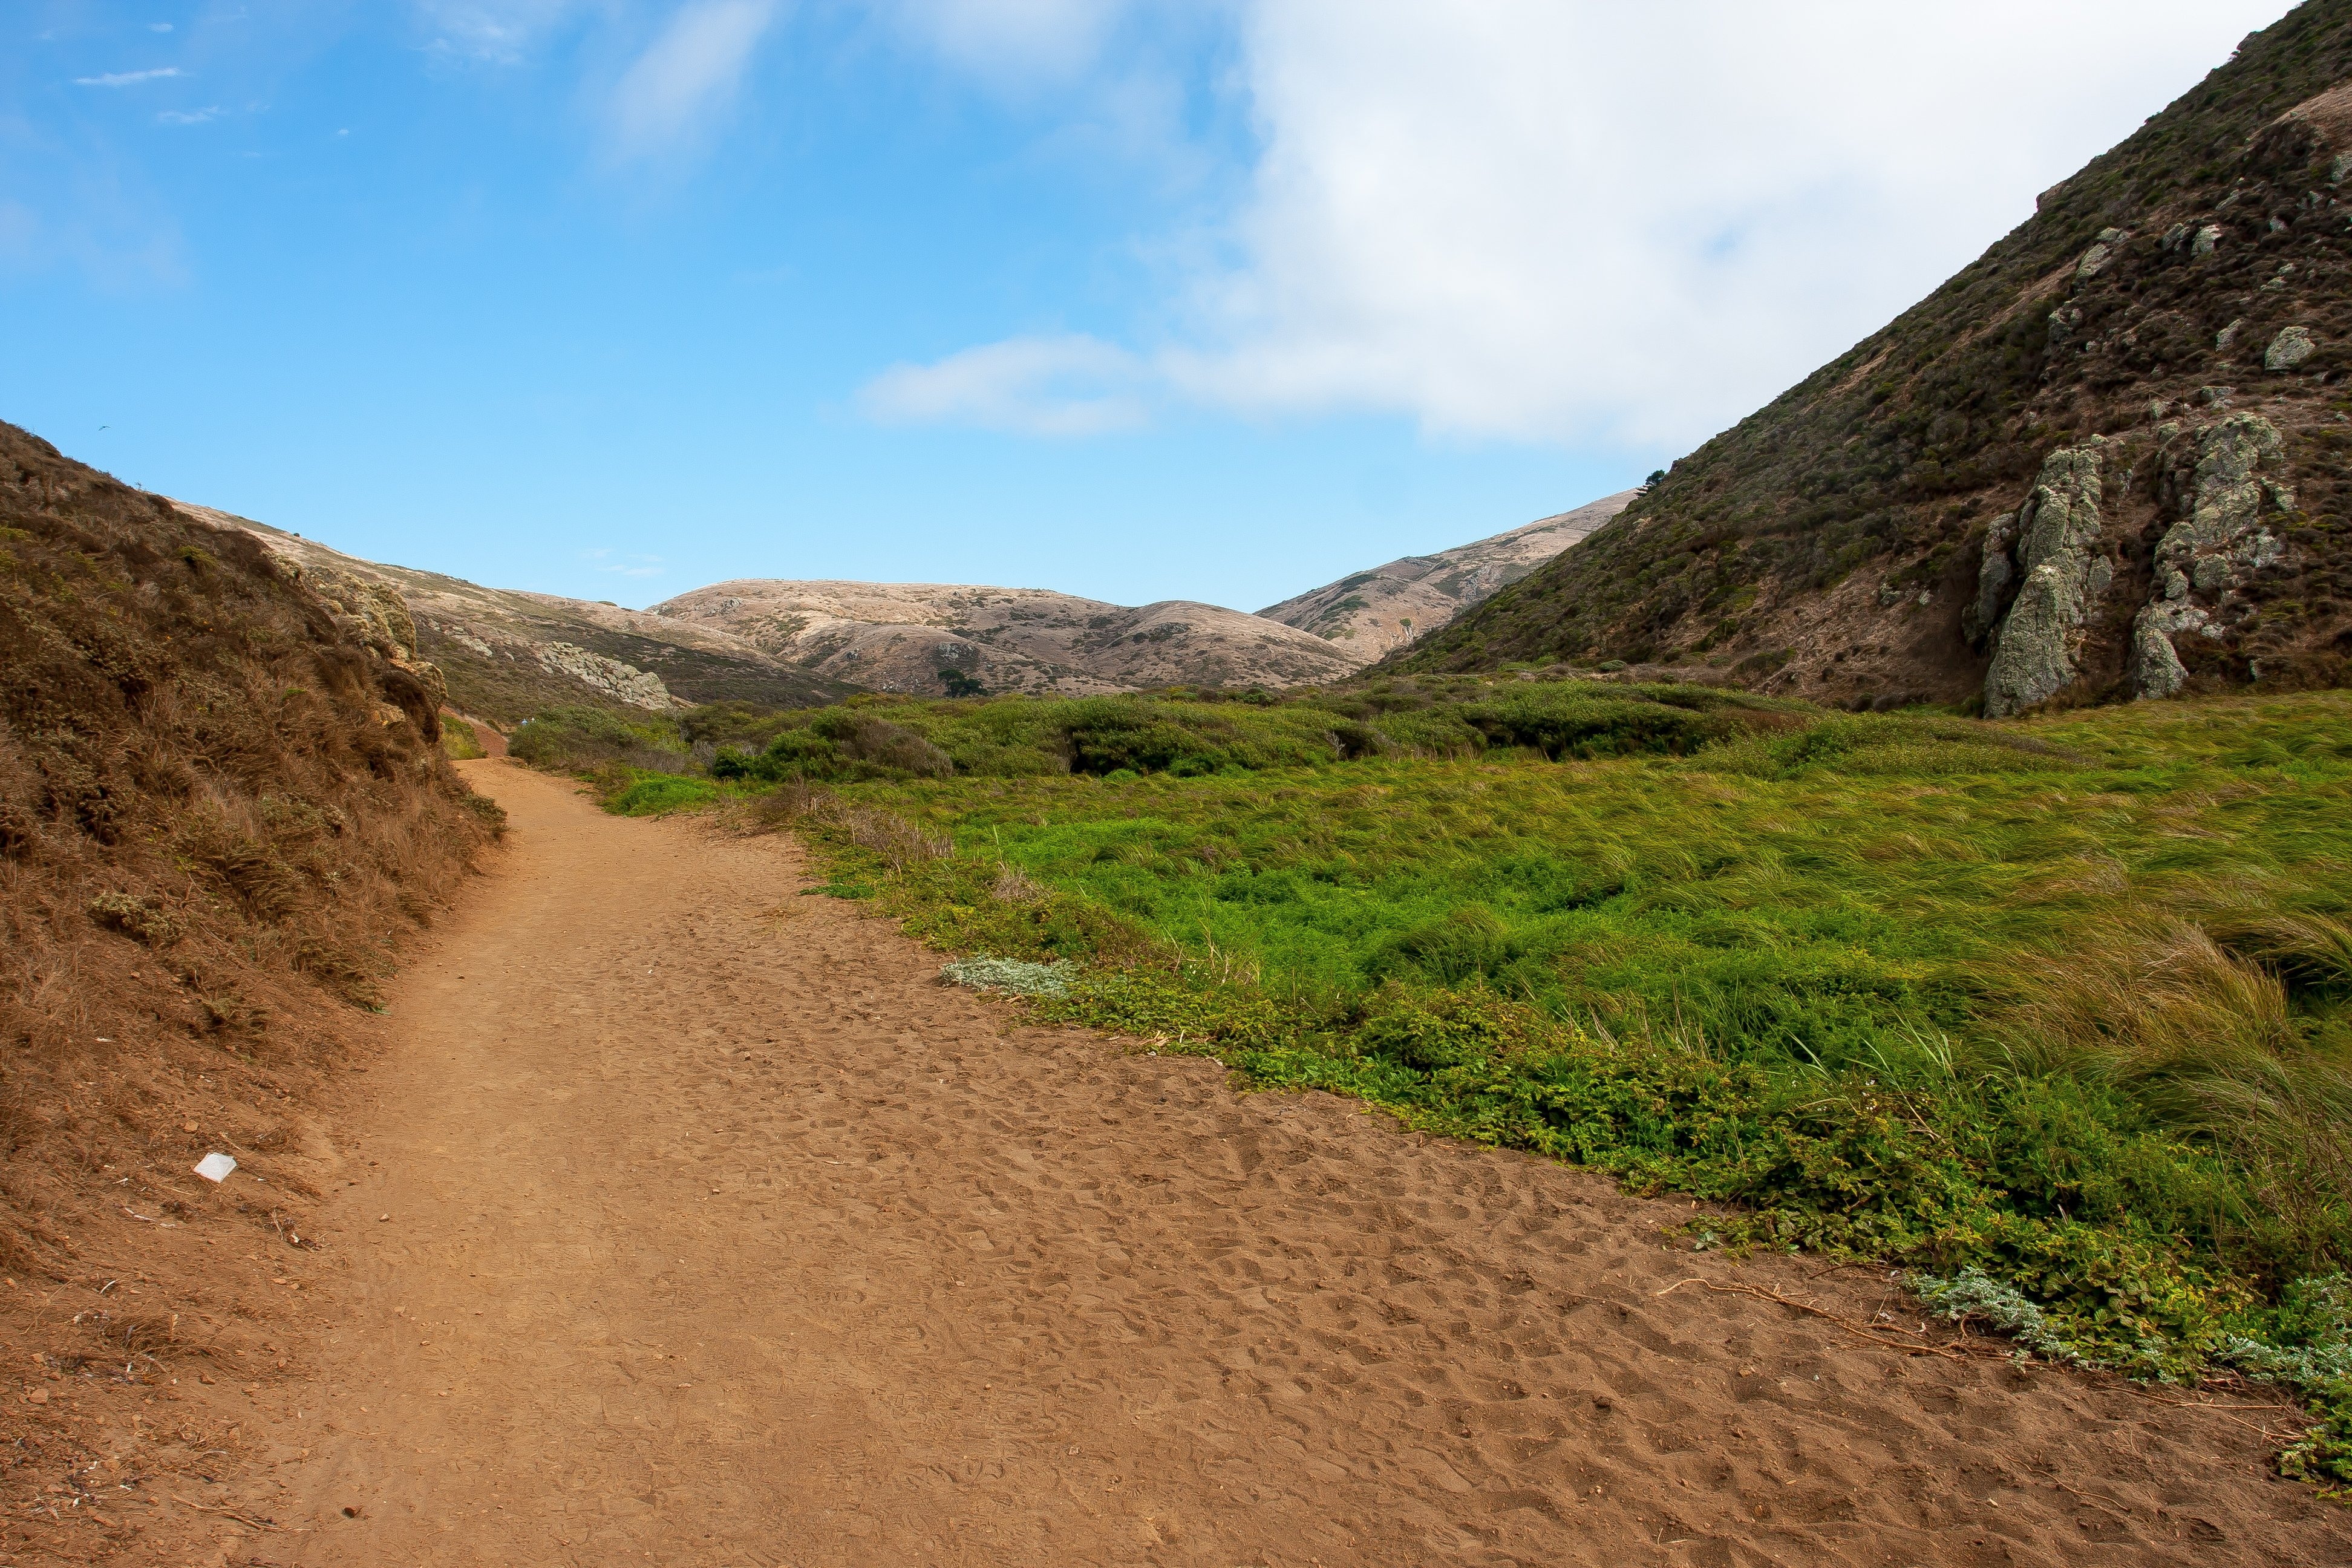 Tennessee Valley Trail at Golden Gate National Recreation Area